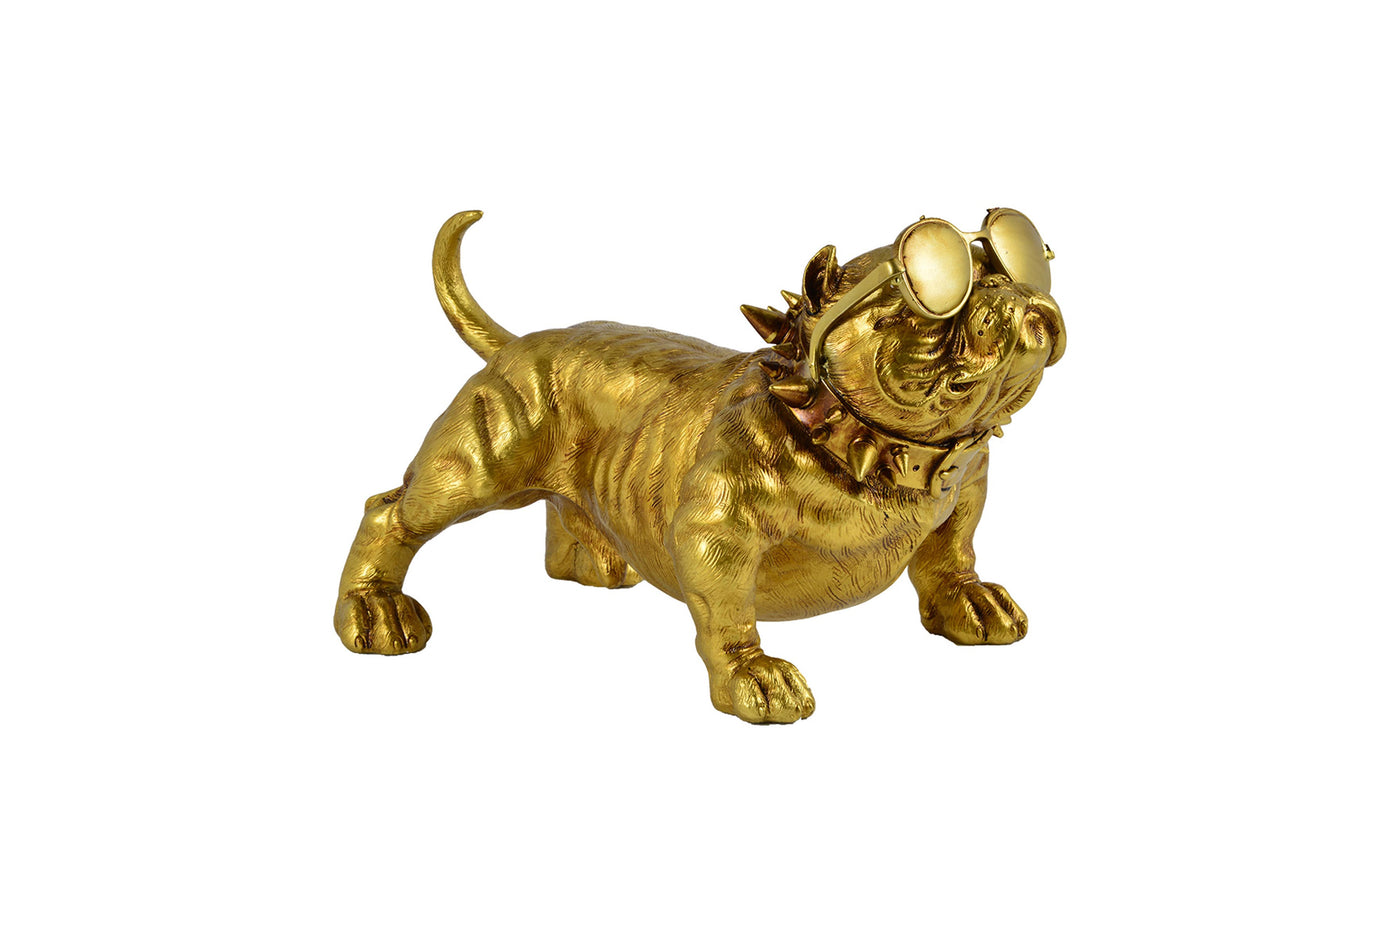 Bailey Brass Gold Dog Object Hoya Casa Hoyacasa.ca couch sofa bed 4 seater sectional table kitchen table love seat sofa bed matress Toronto Canada manufactures home decoration frames indoor Ottoman